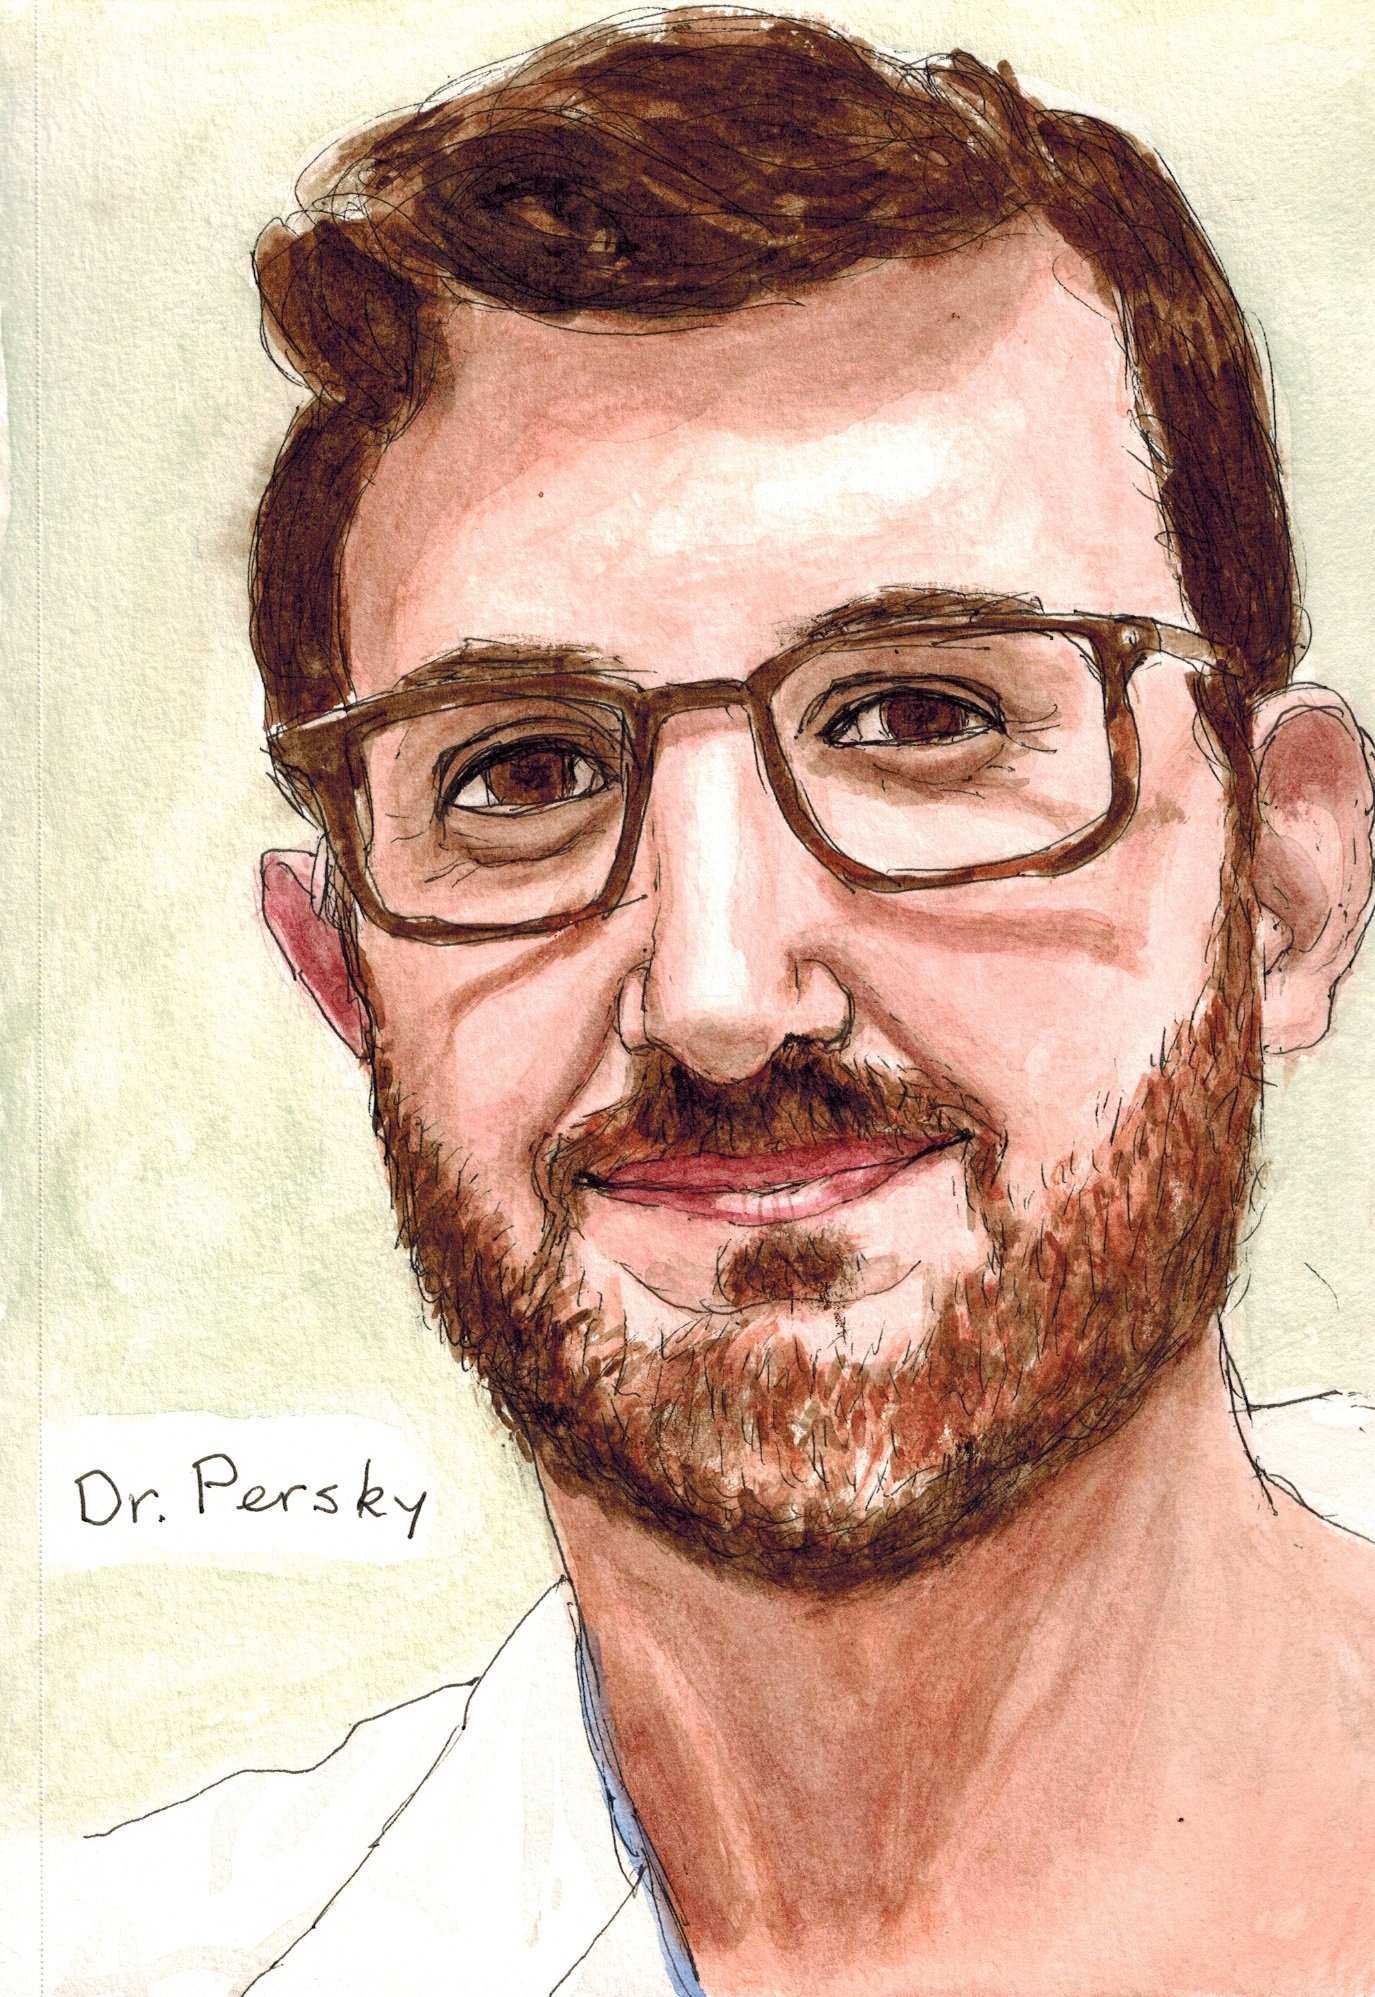 Dr. Persky